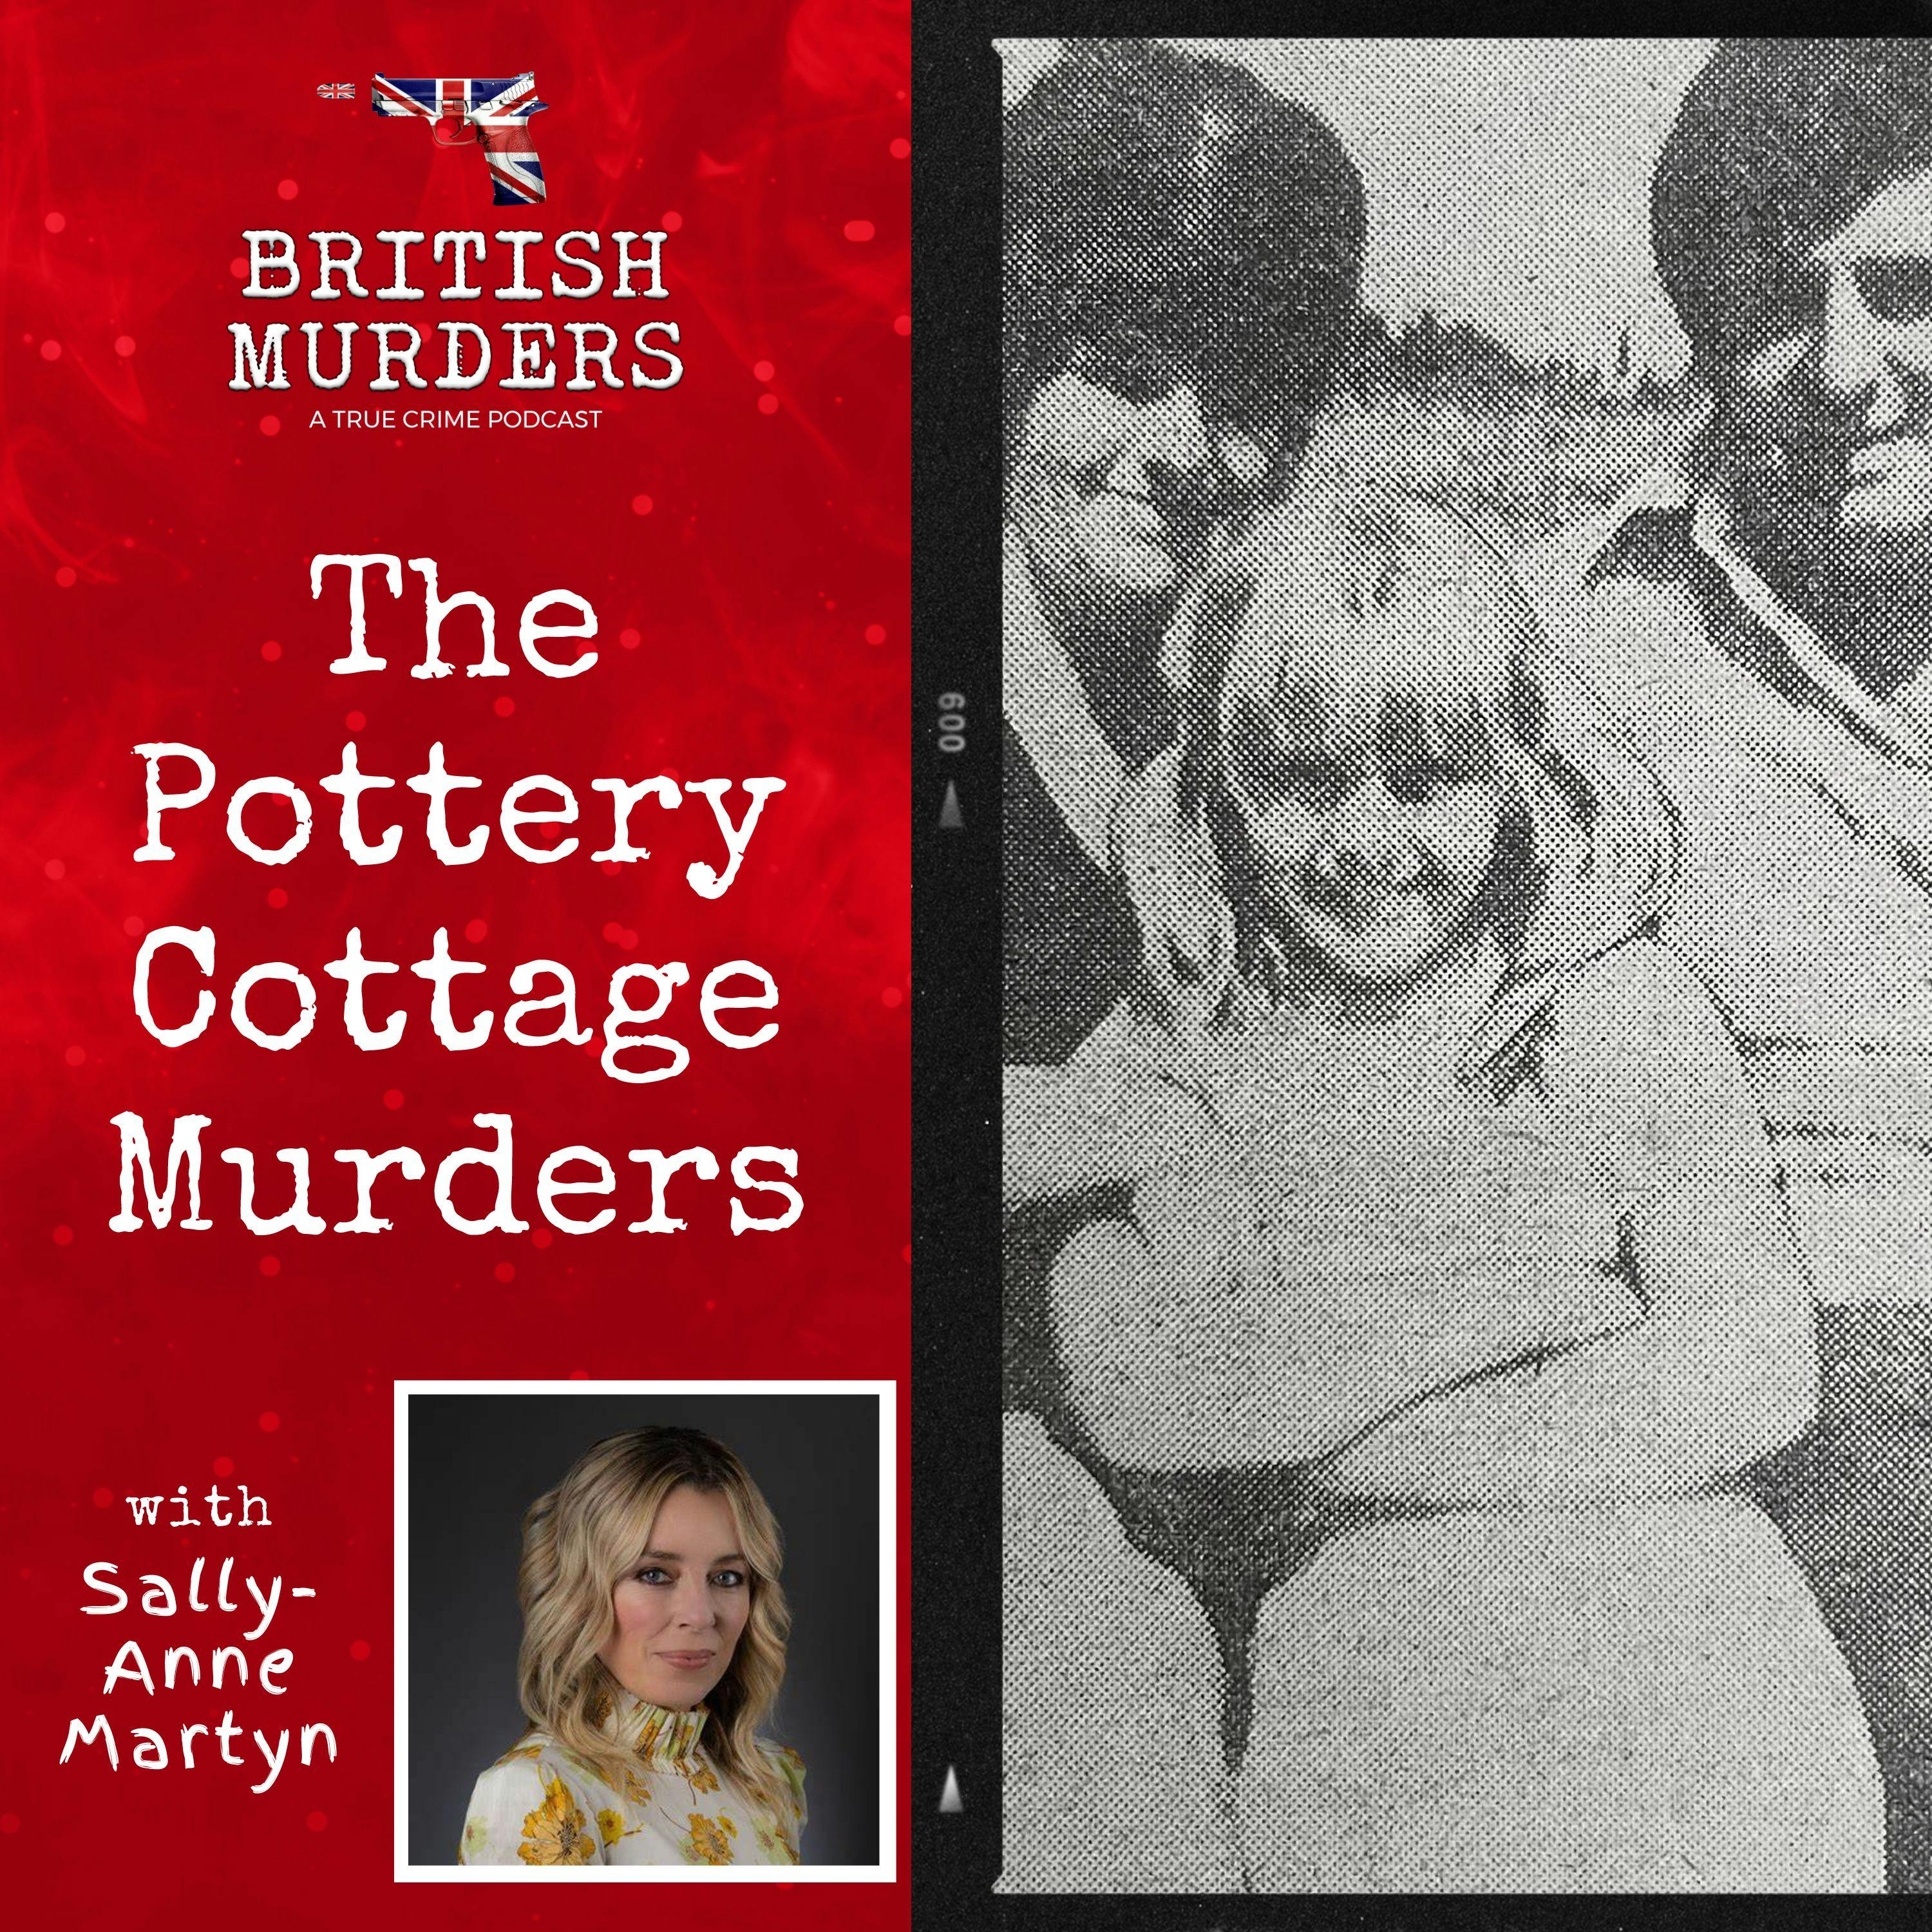 Chesterfield's Darkest Day: The 1977 Pottery Cottage Murders